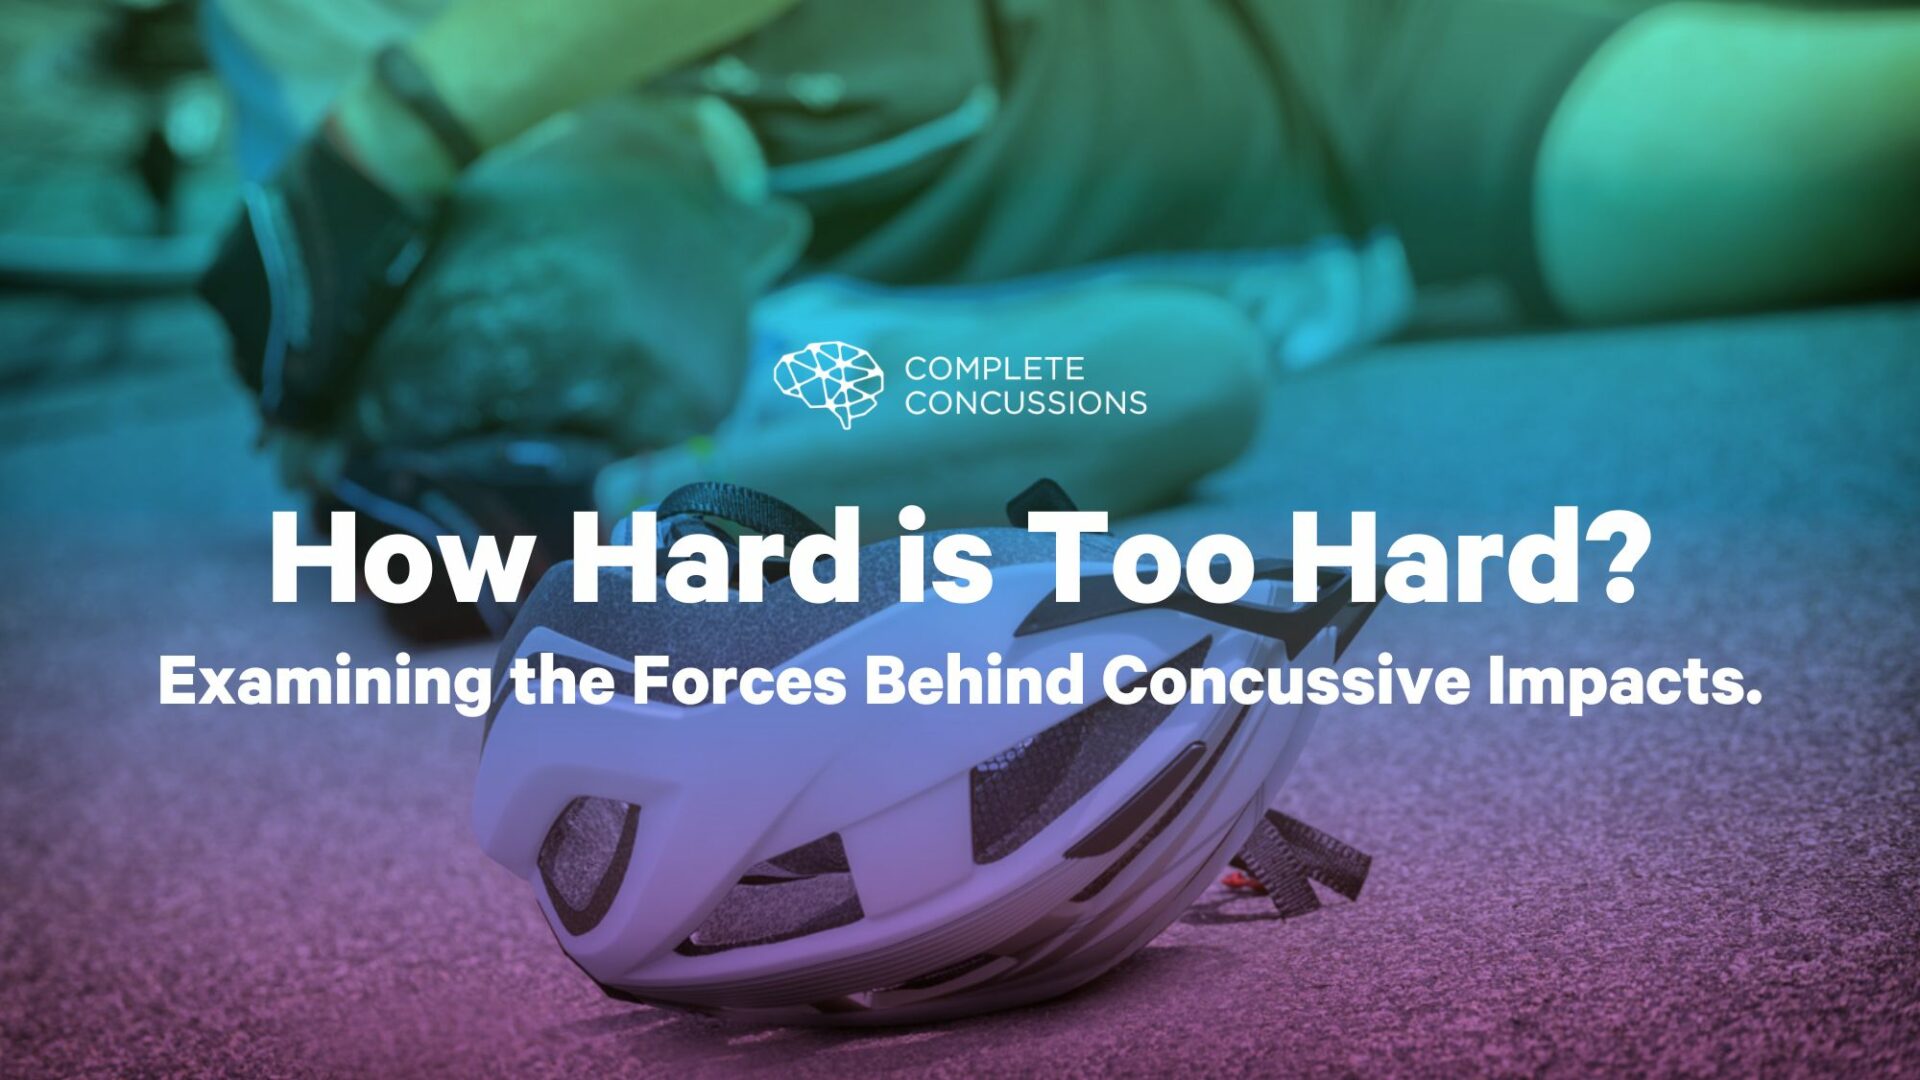 How Hard is Too Hard? Examining the Forces Behind Concussive Impacts